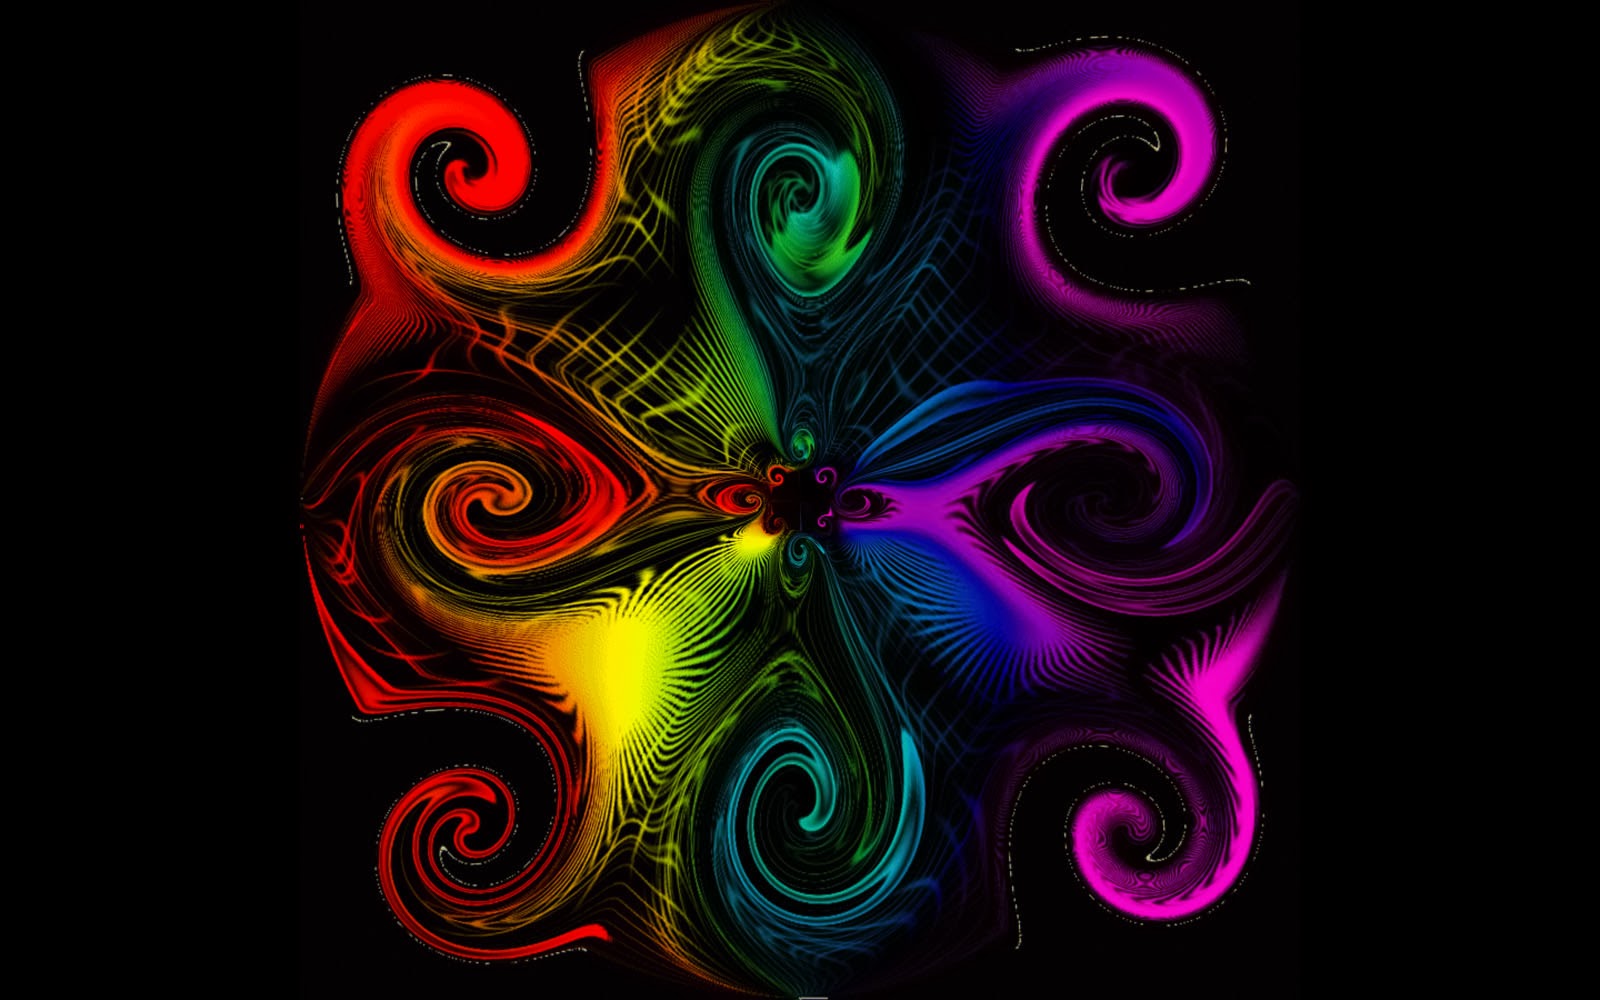 Wallpapers Colorful Swirls Wallpapers HD Wallpapers Download Free Map Images Wallpaper [wallpaper376.blogspot.com]